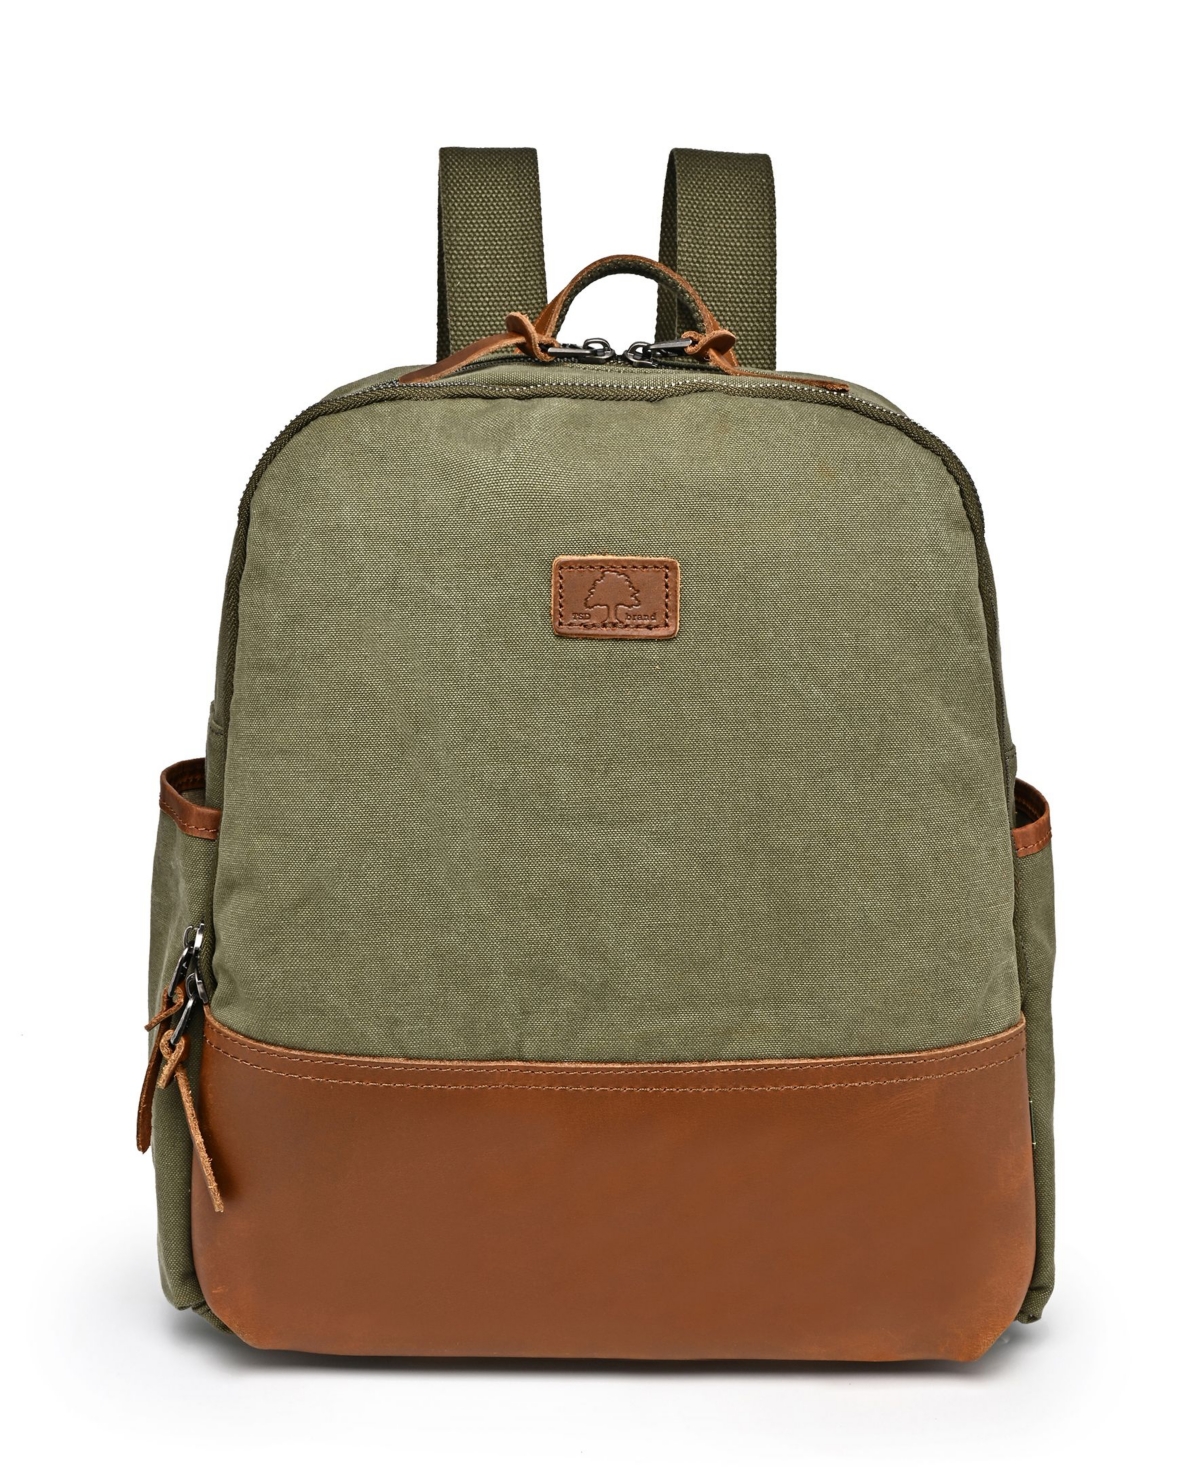 Magnolia Hill Canvas Backpack - Teal